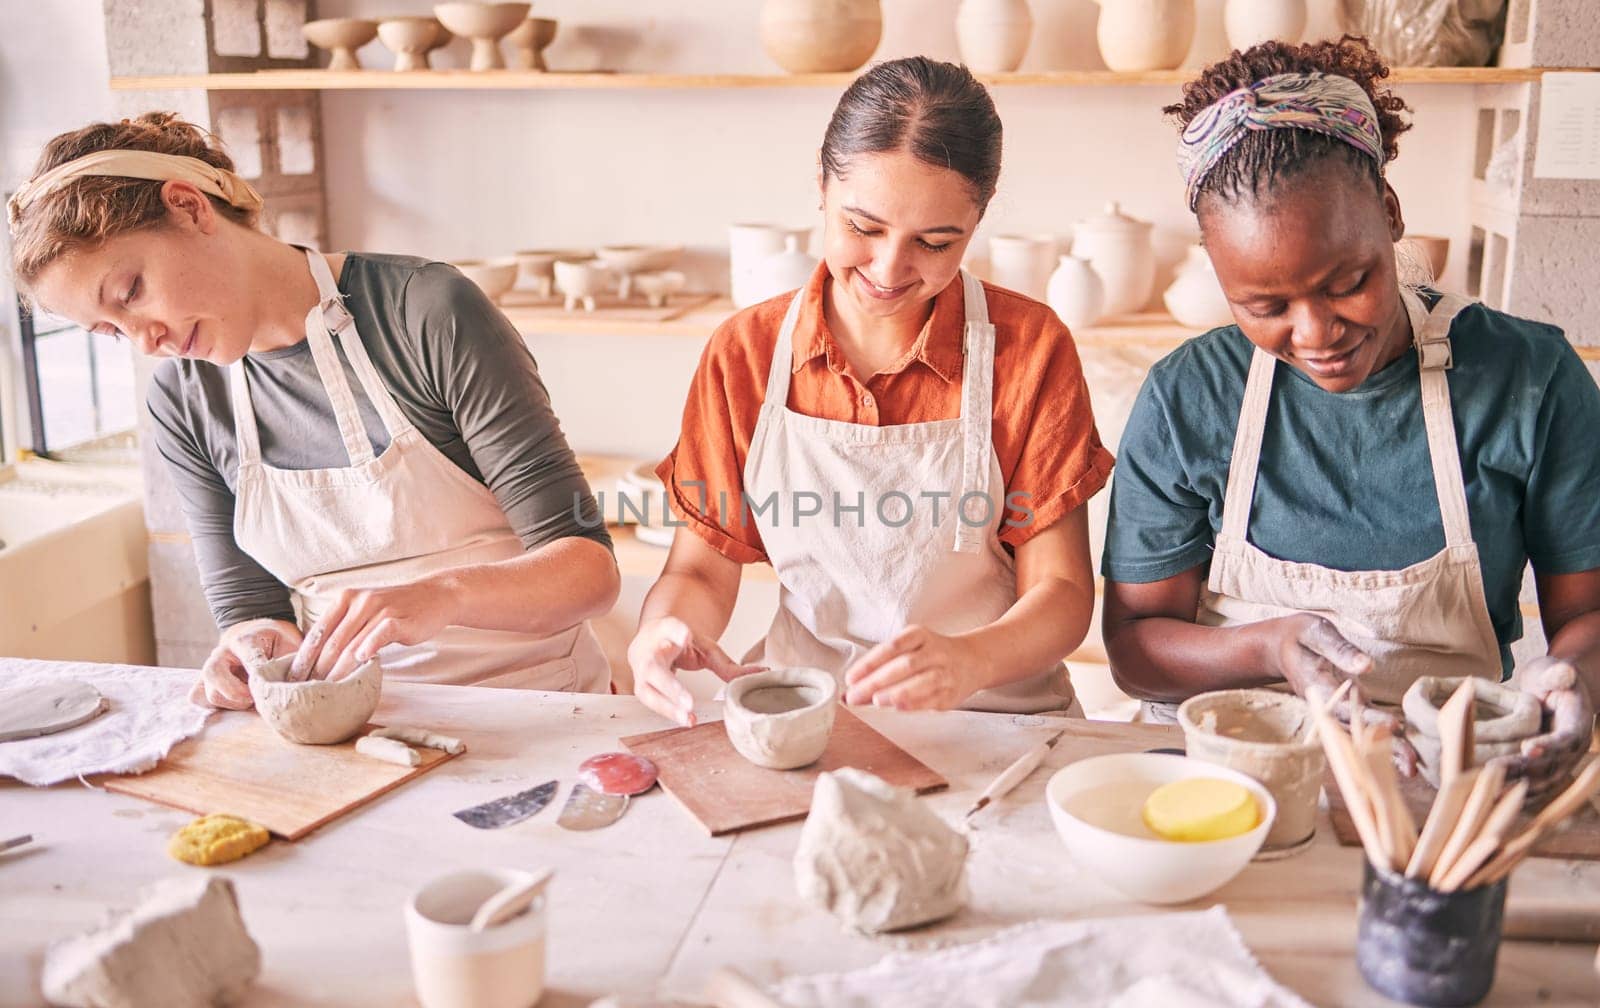 Pottery class, creative workshop or women design sculpture mold, clay manufacturing or art product. Diversity, ceramic retail store or startup small business owner, artist or studio group molding by YuriArcurs